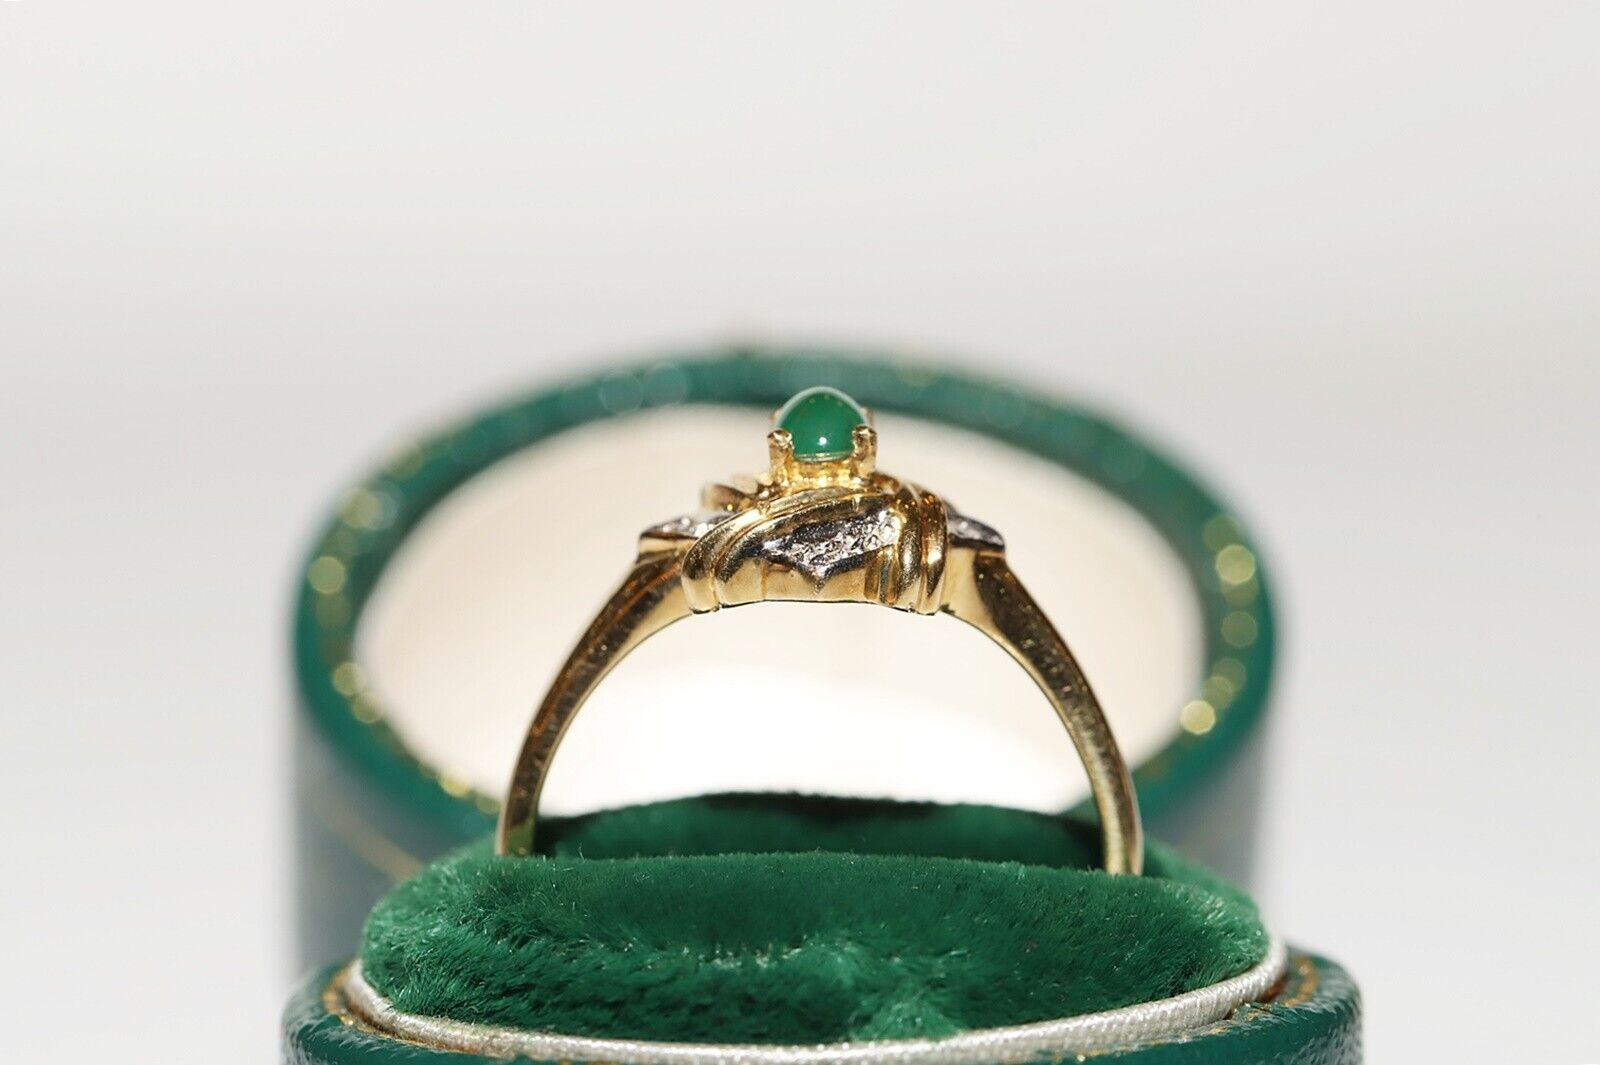 In very good condition.
Total weight 3 grams.
Totally about 0.04 ct diamond.
The diamond has vs clarity and H color.
Totally 0.25 ct Emerald.
Ring size is US 7.5
We can make any size.(We offer free resizing).
Original vintage item about 50 years